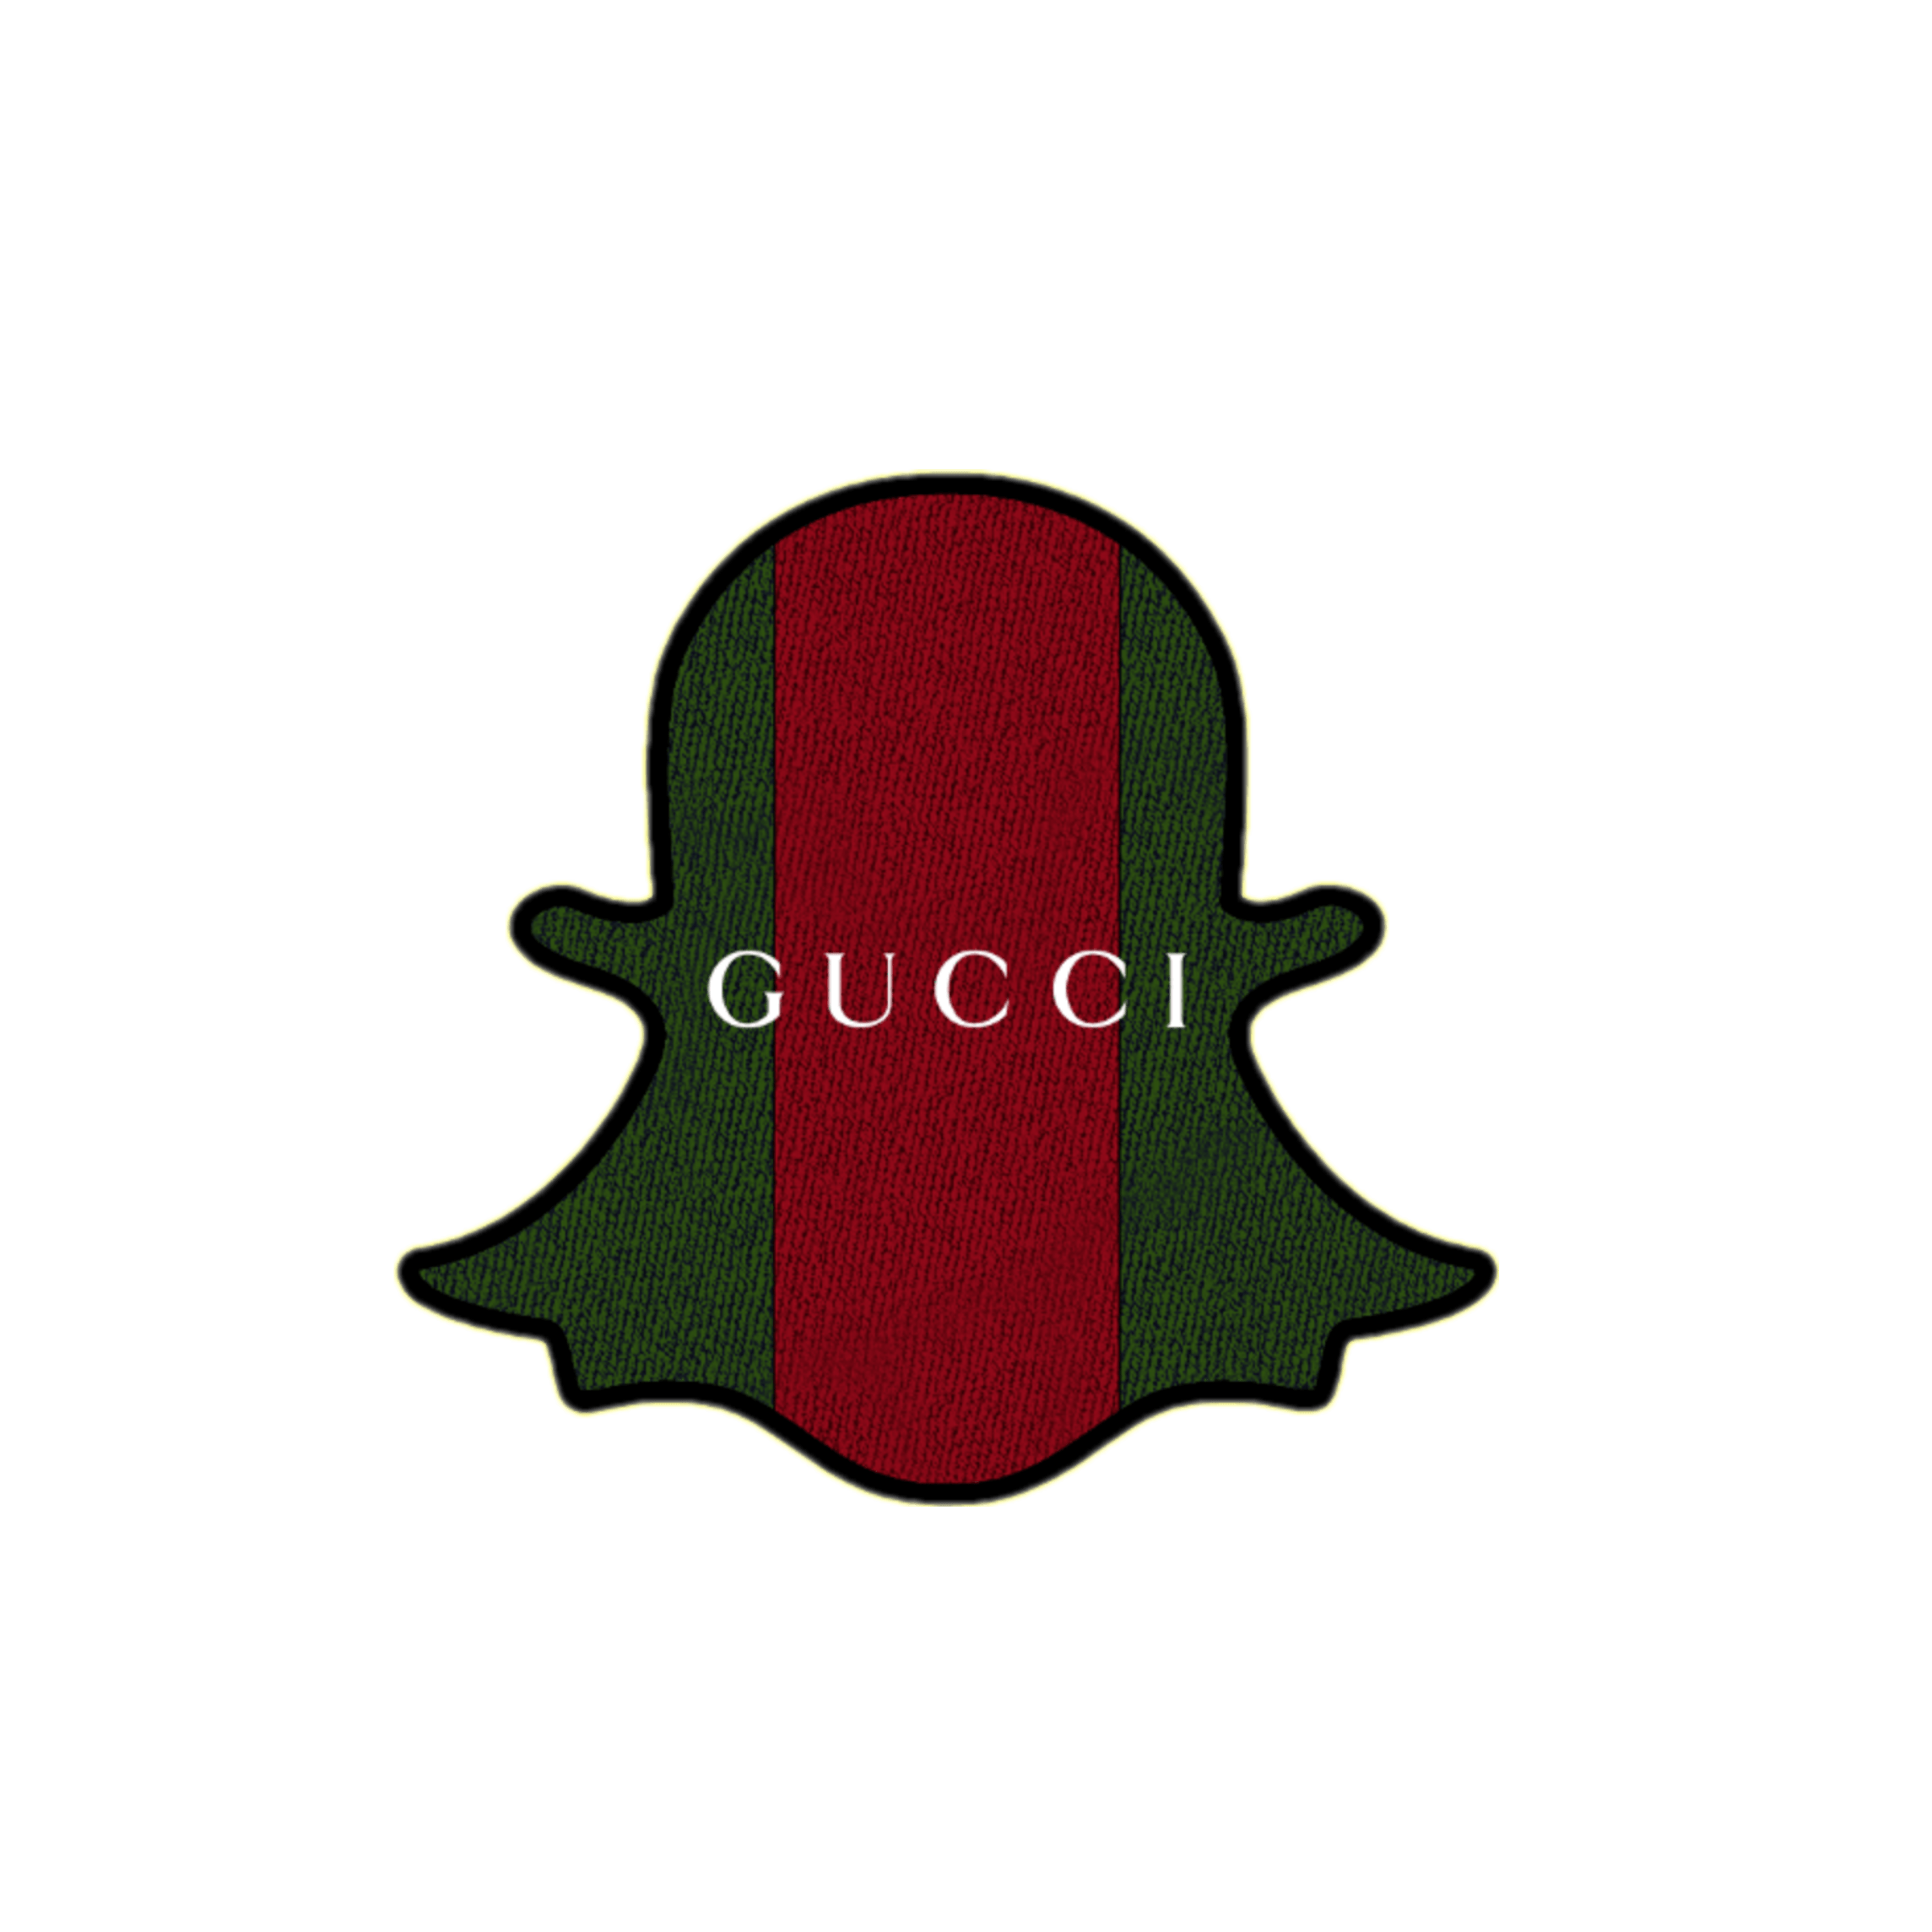 Download for free 10 PNG Tumblr logo gucci top image at